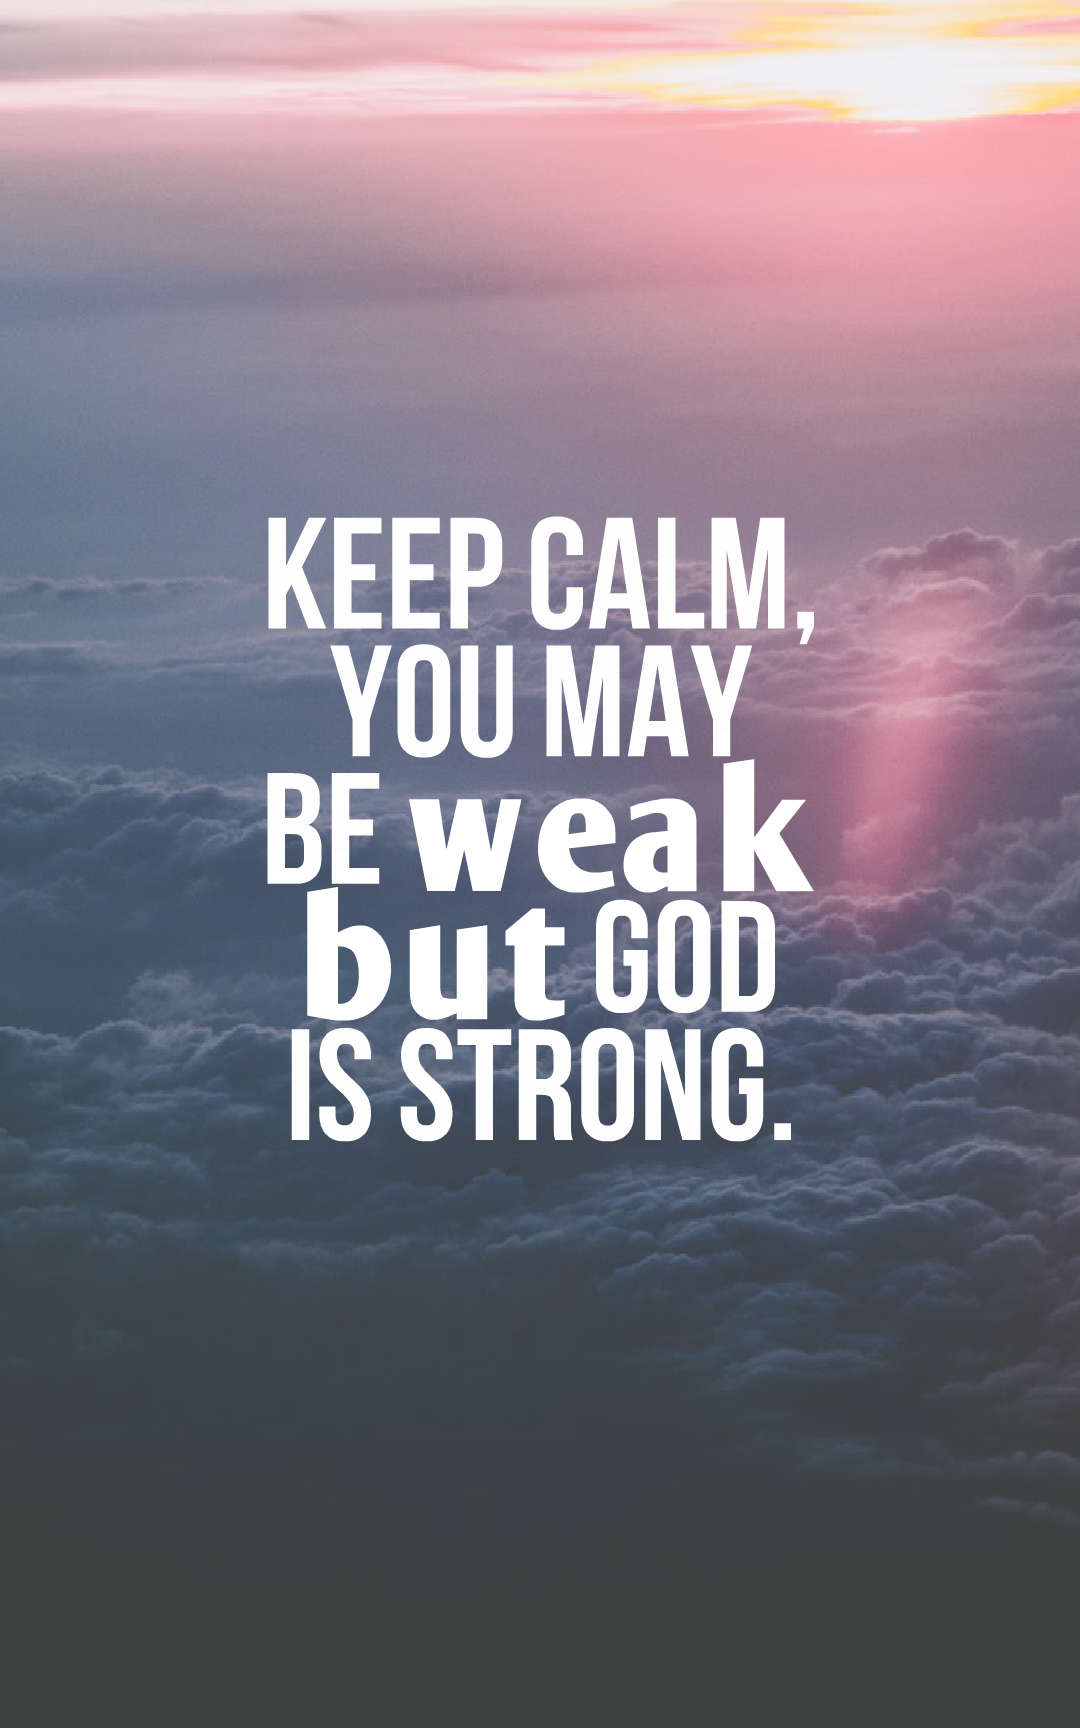 Keep calm, you may be weak but God is strong.